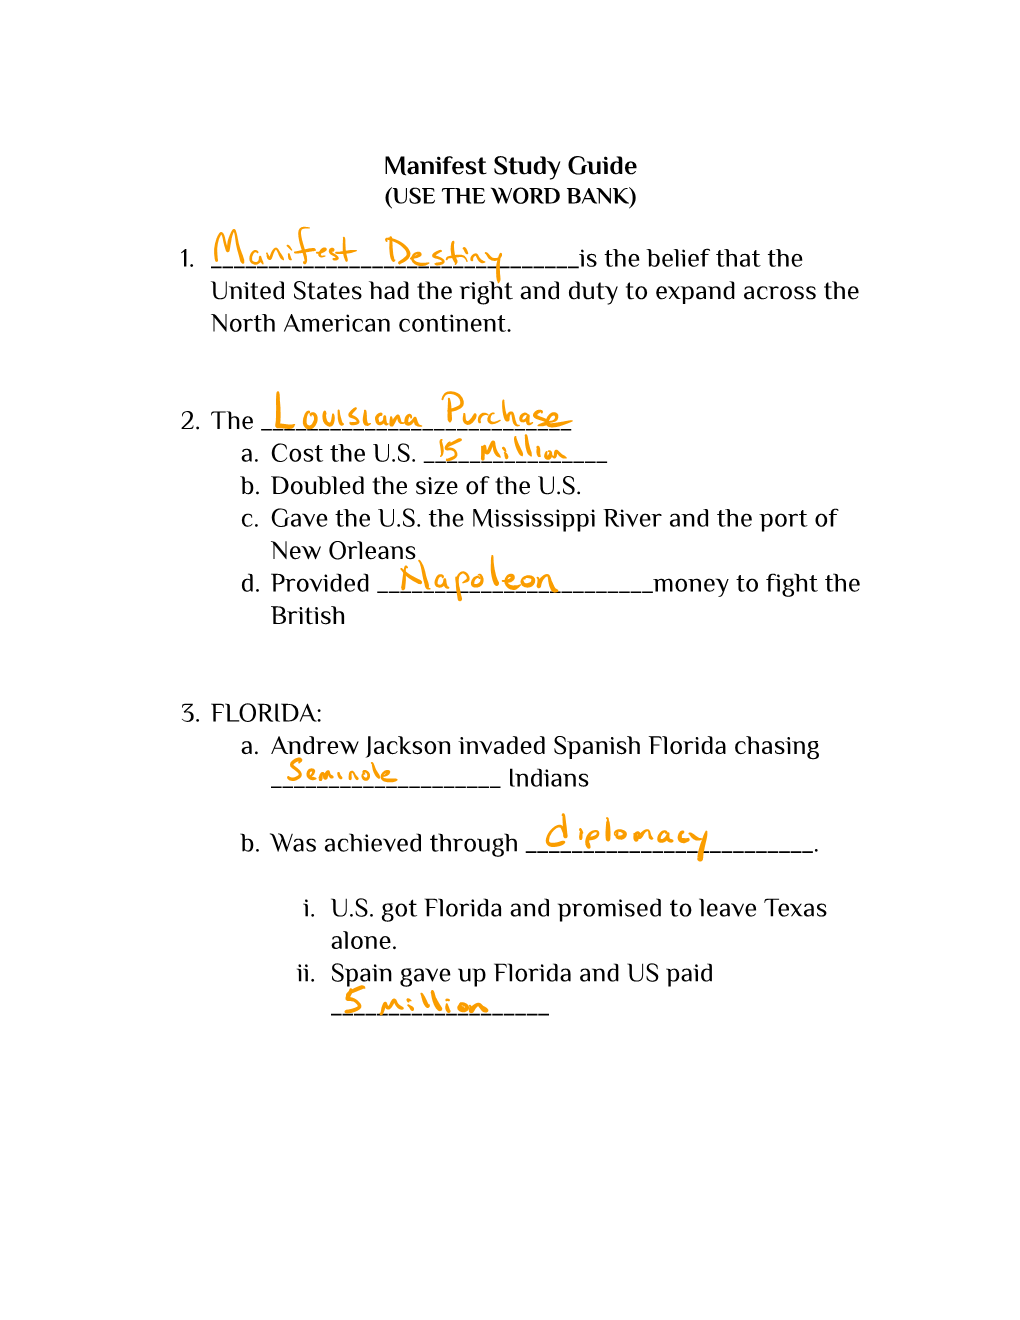 Manifest Study Guide (USE the WORD BANK)